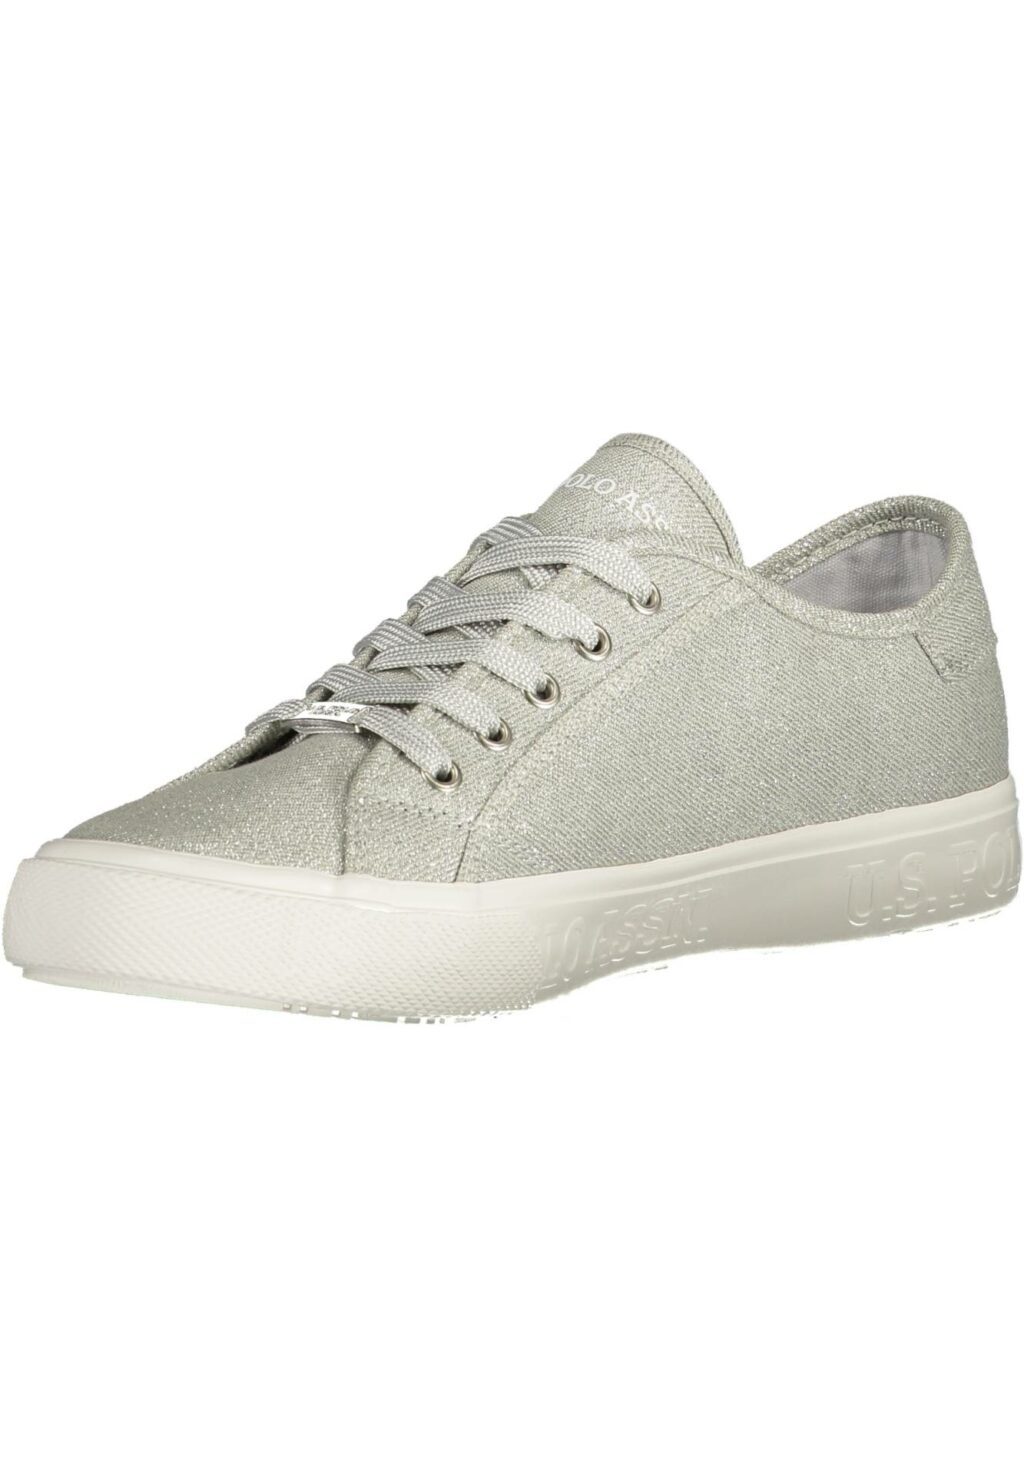 US POLO ASSN. SPORTS SHOES WOMAN SILVER MAREW001W2C2_ARGENTO_SIL